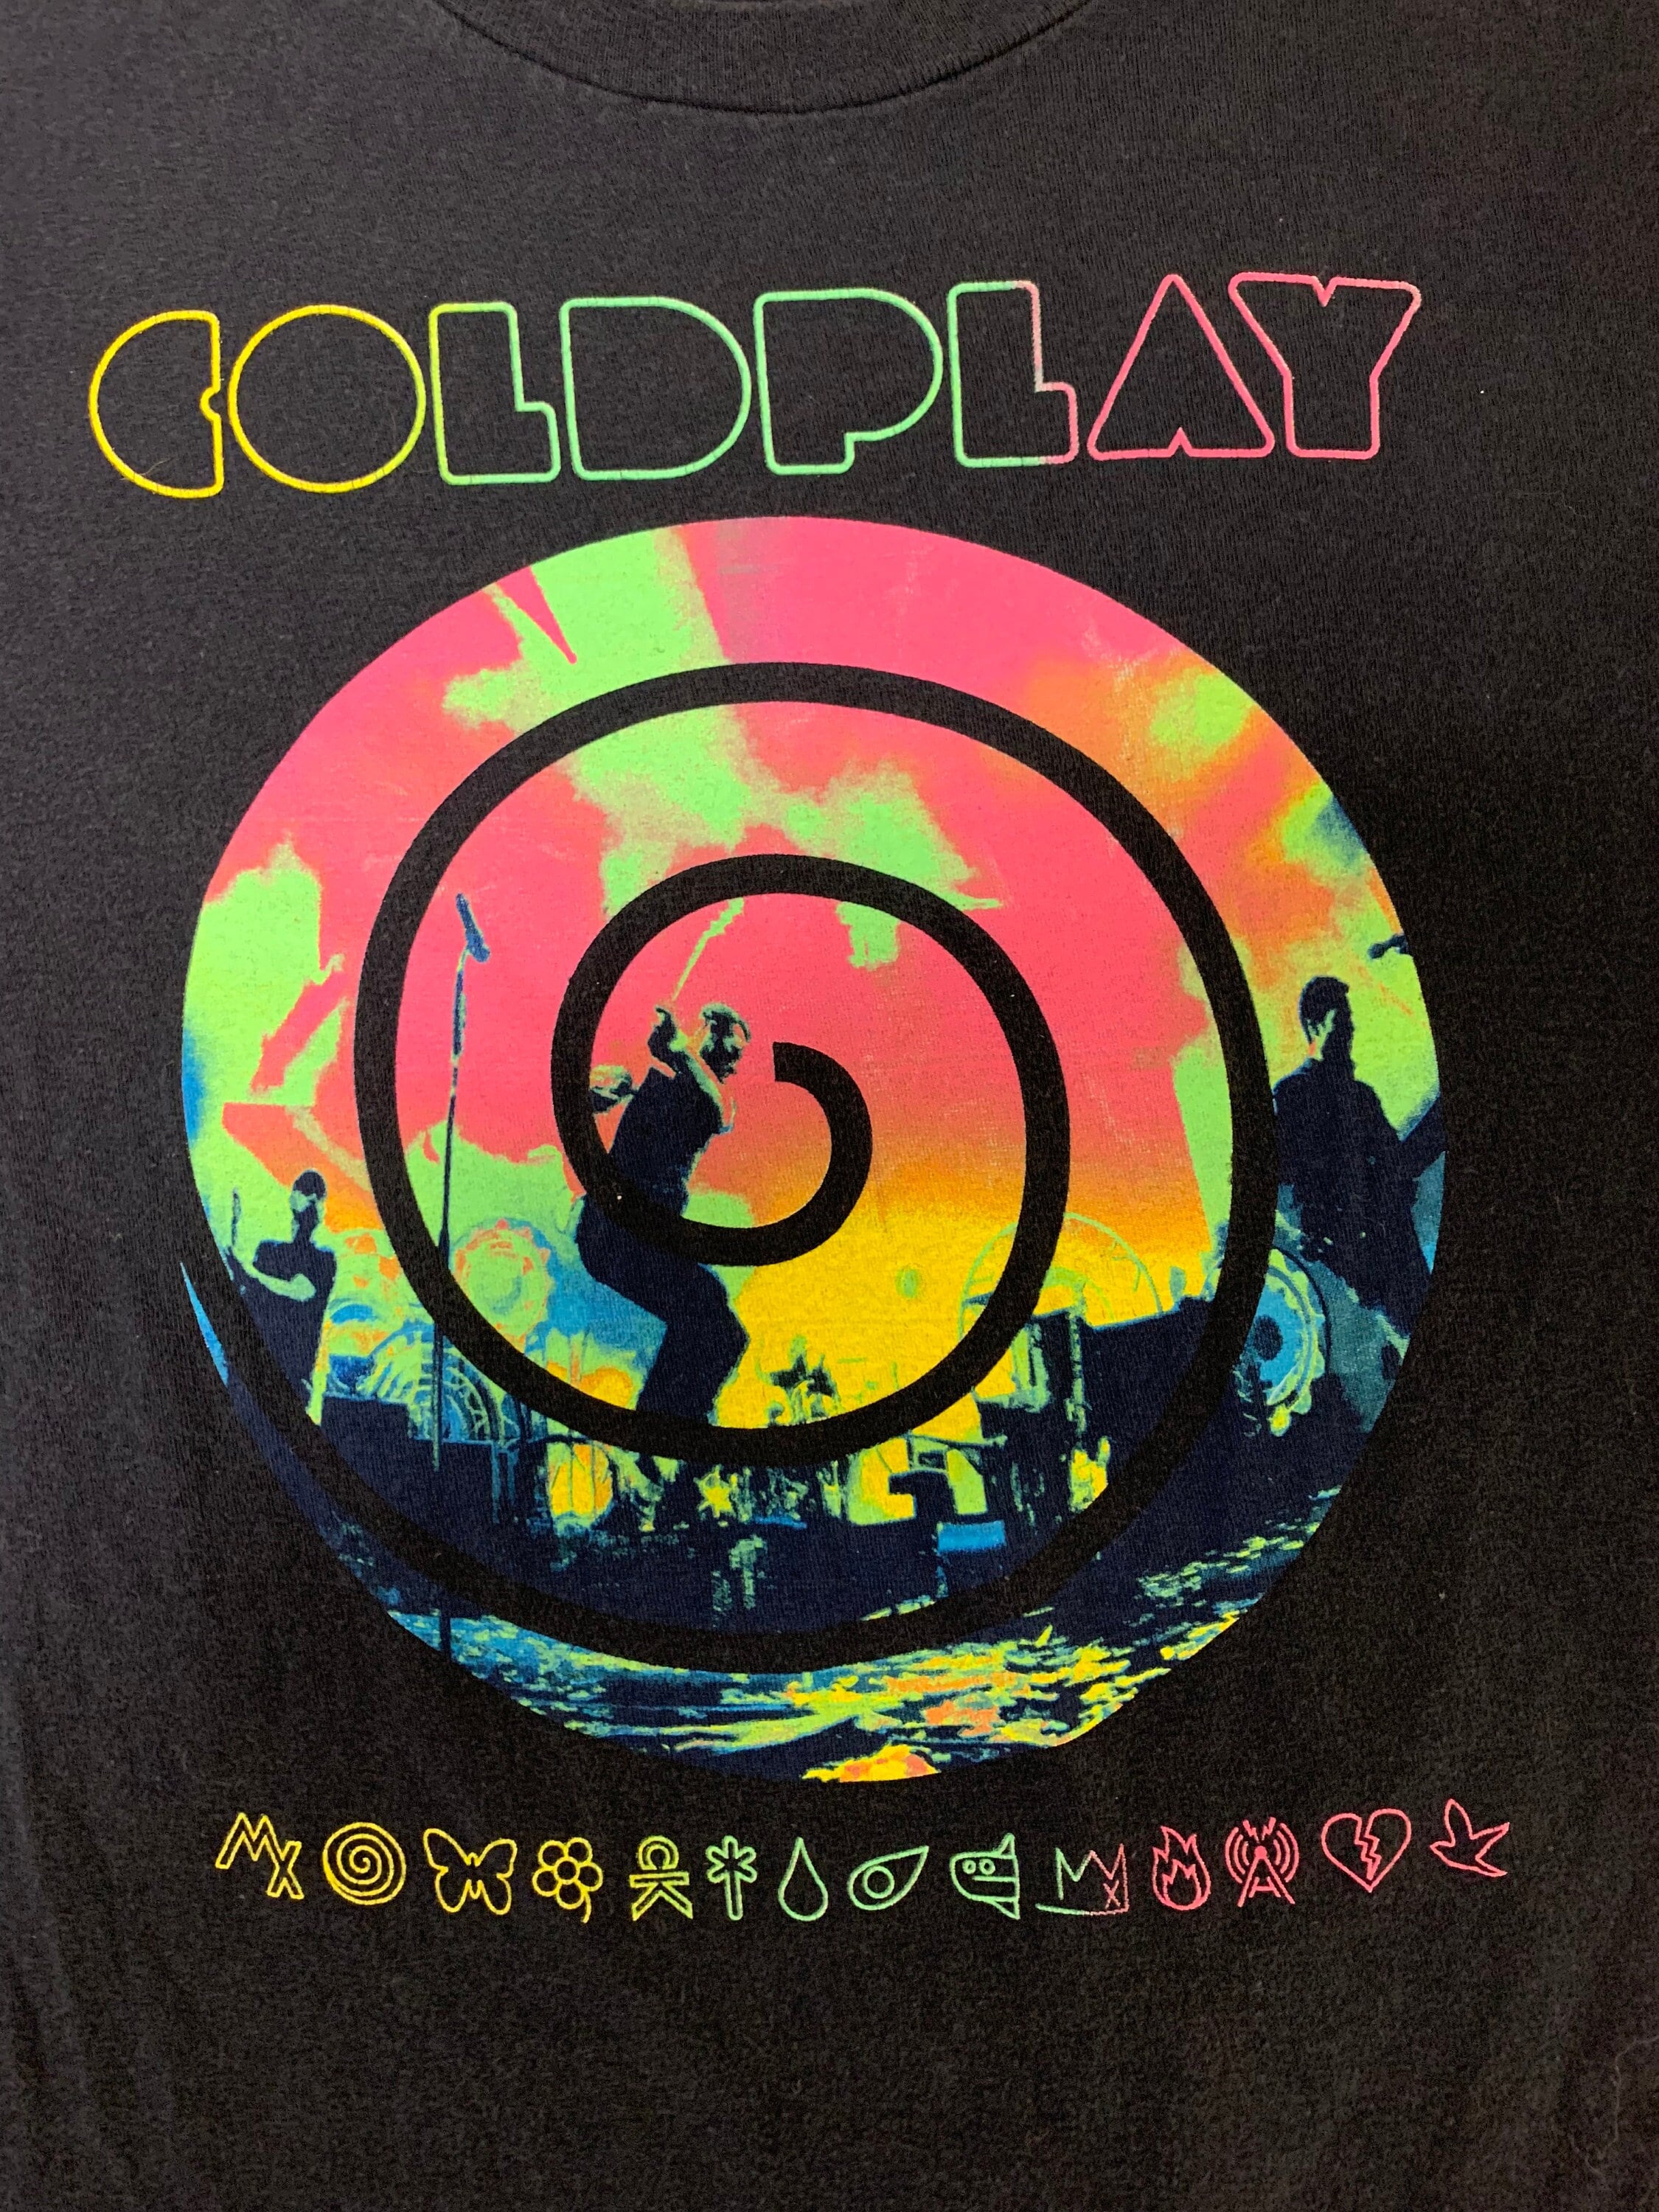 Coldplay Band Music Of The Spheres Tour Shirt, Coldplay Worl - Inspire  Uplift